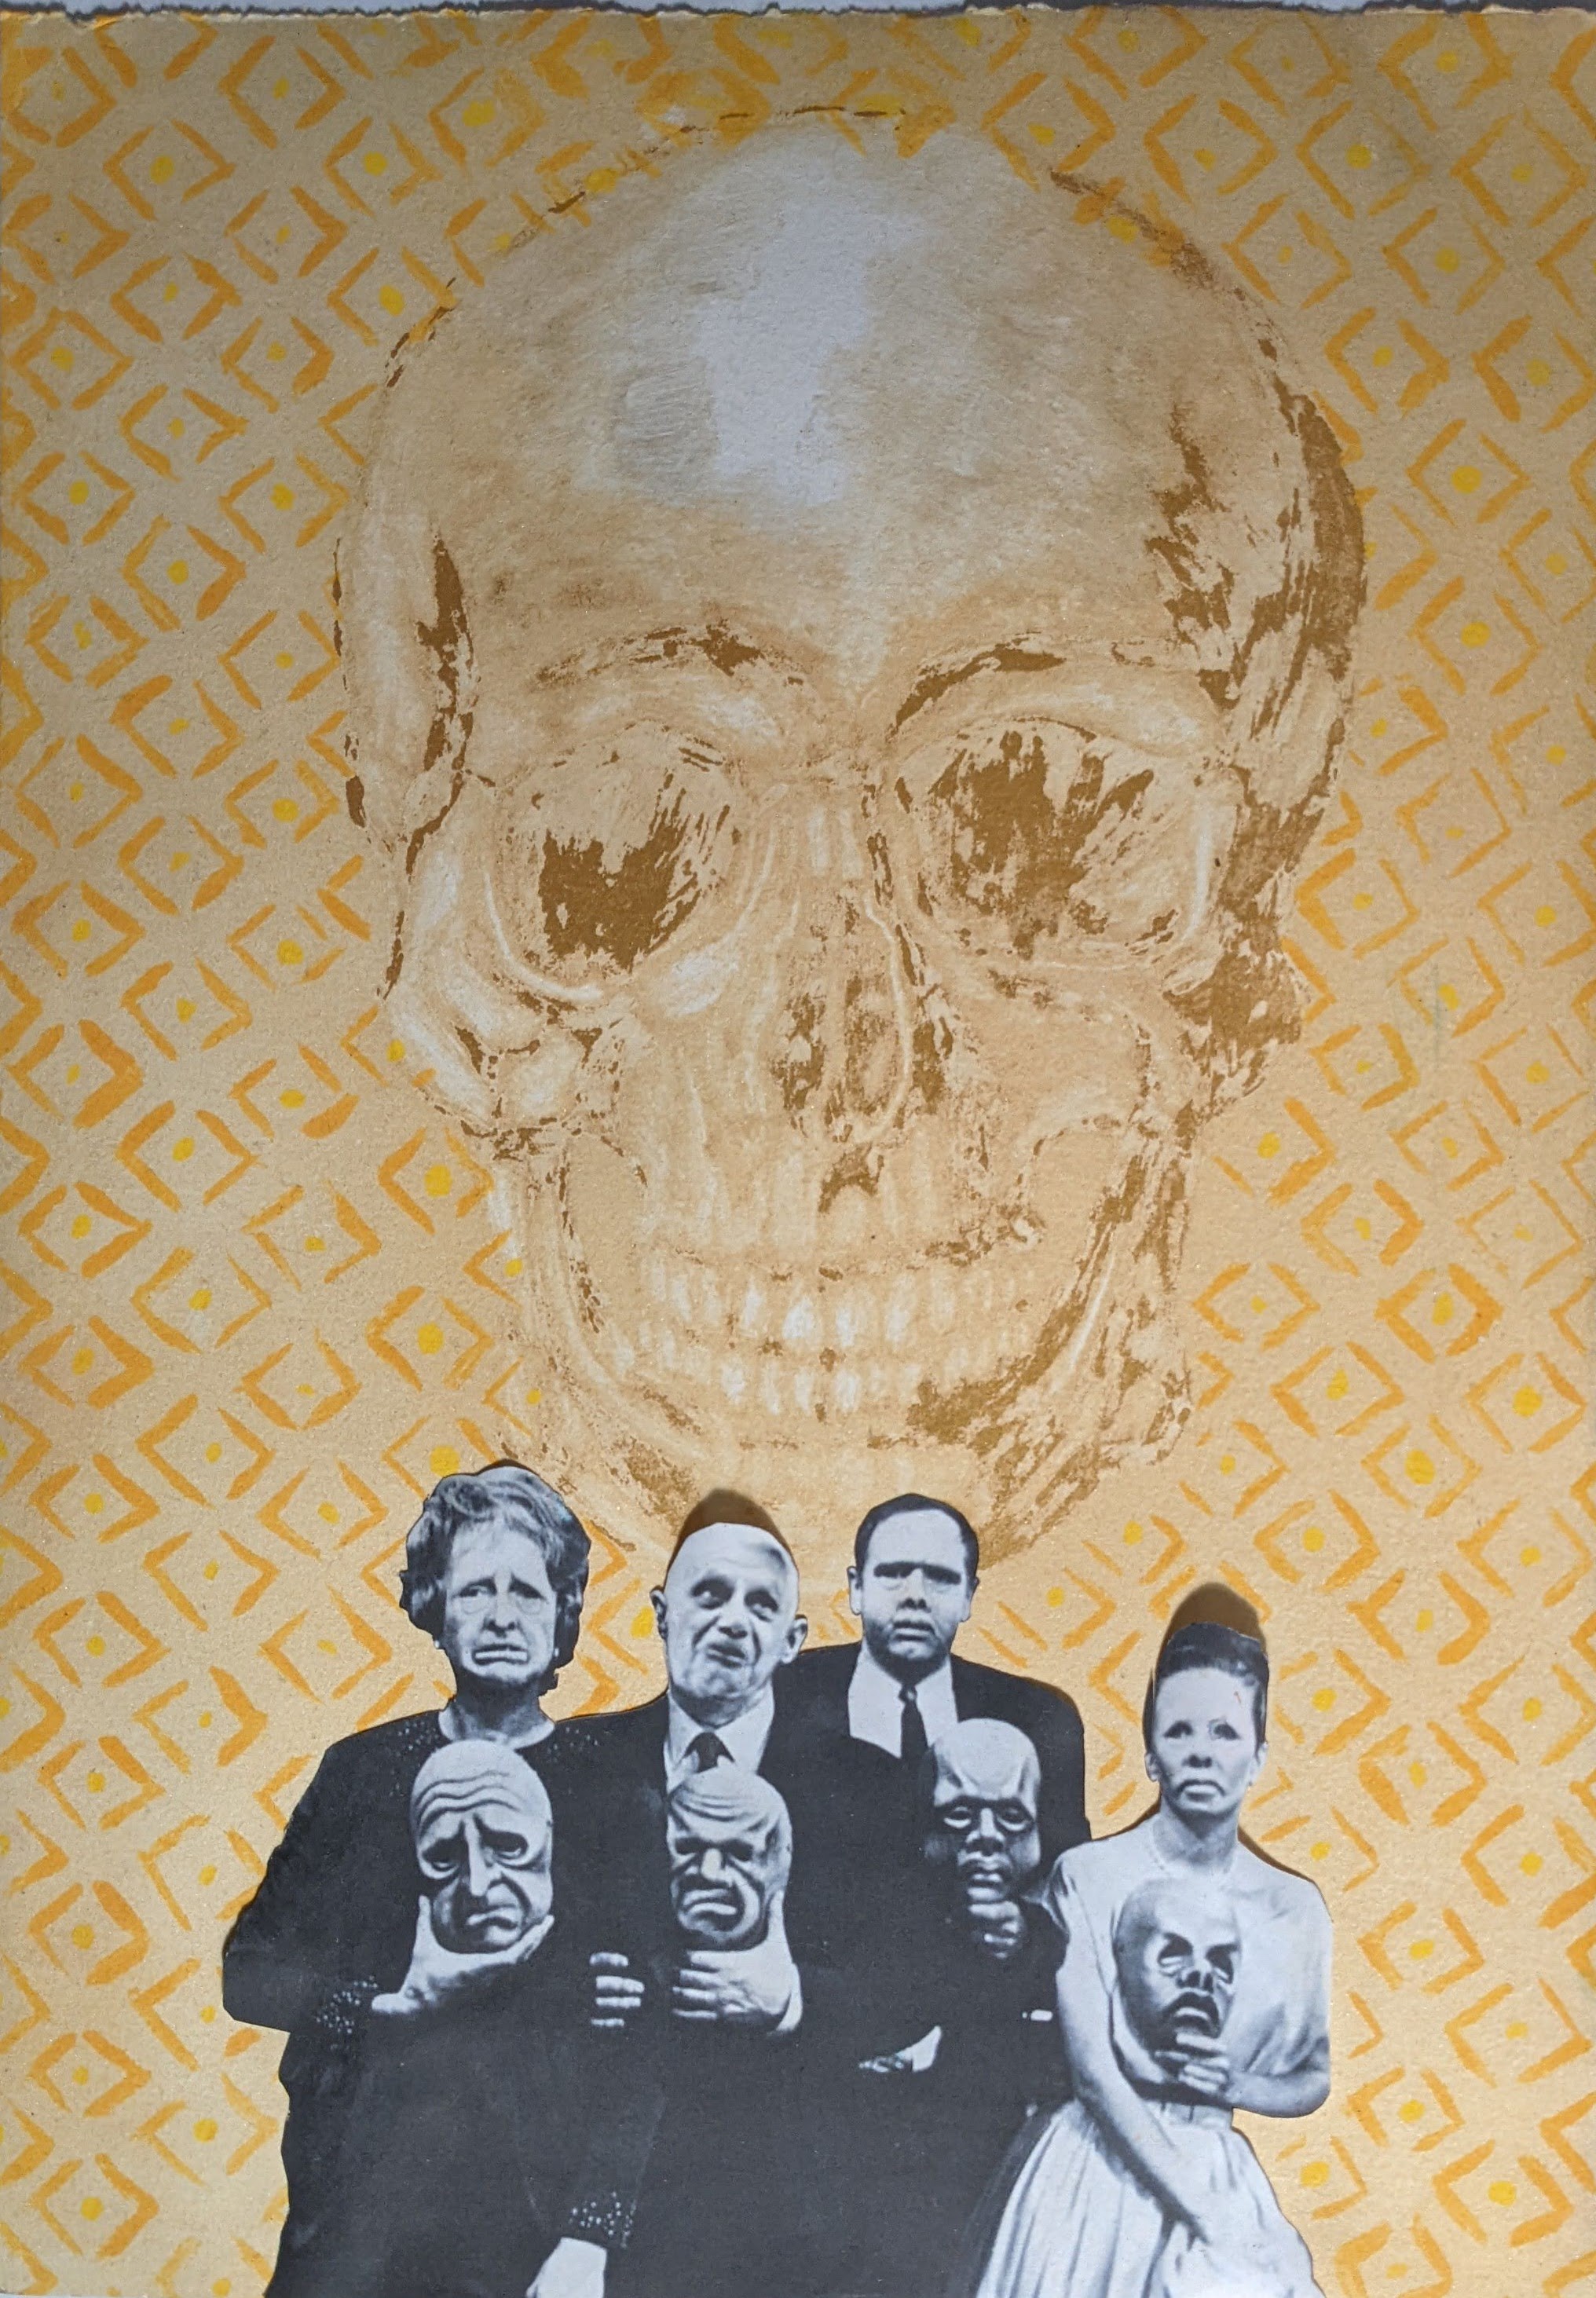 Screenprint of Twilight Zone masked people in front of skull